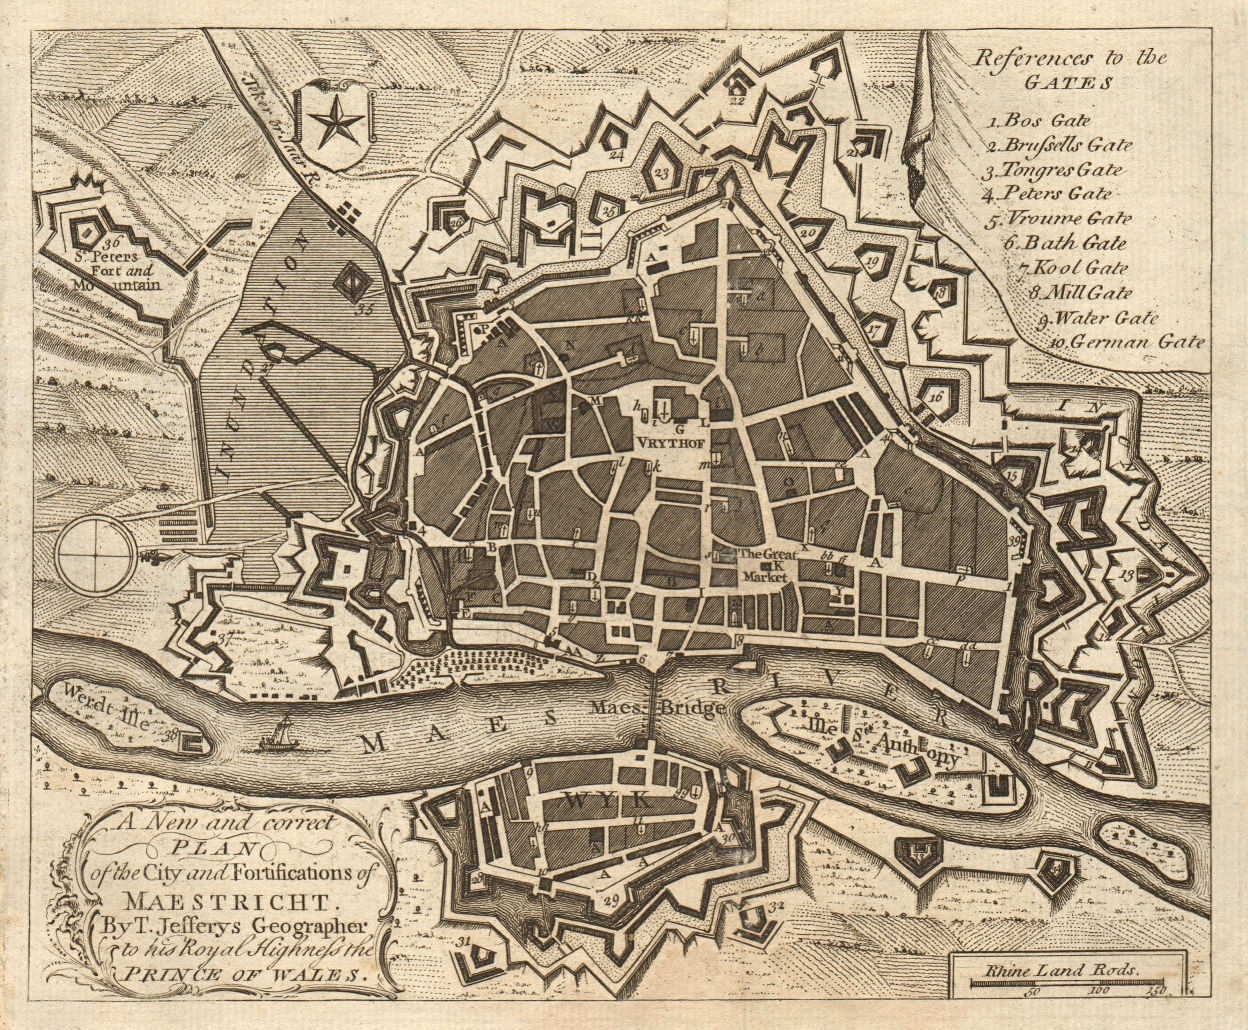 Associate Product Plan of the city and fortifications of Maestricht. Maastricht. JEFFERYS 1748 map